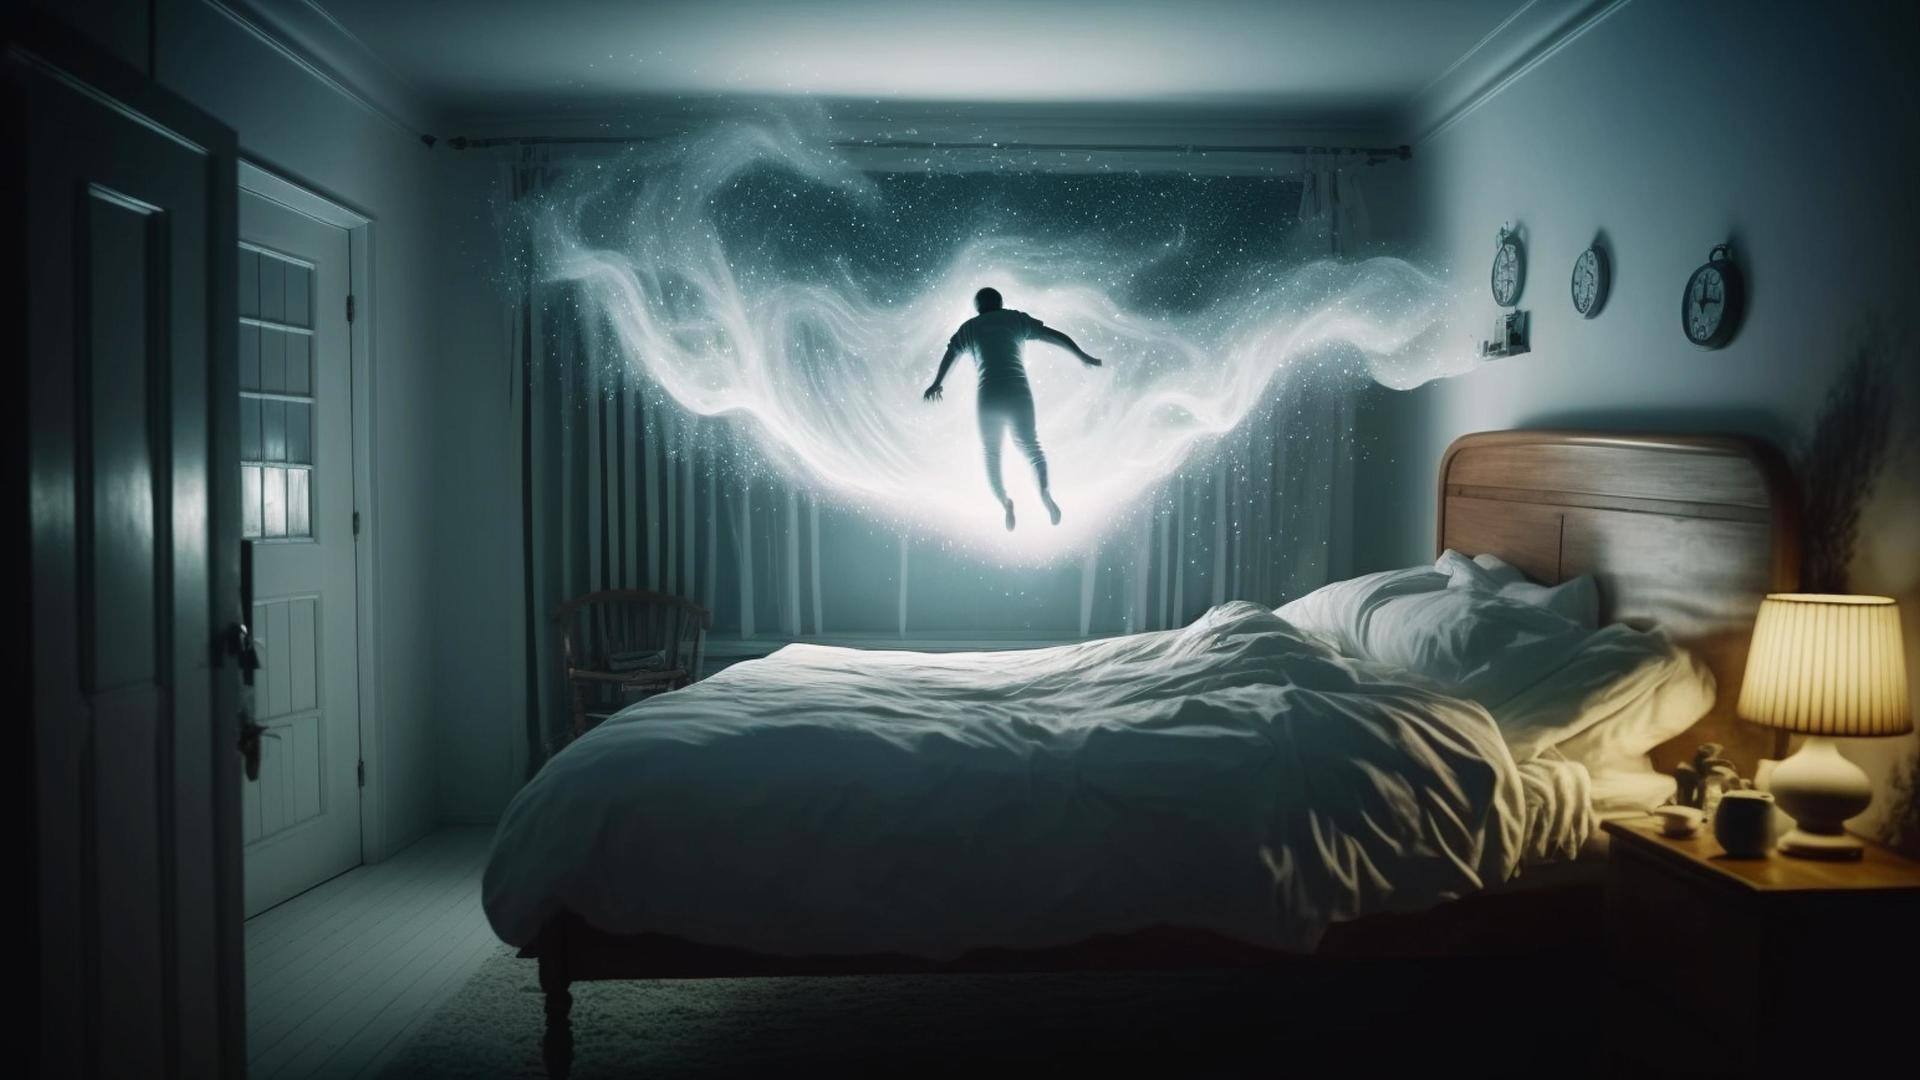  Having nightmares? Here's what you can do